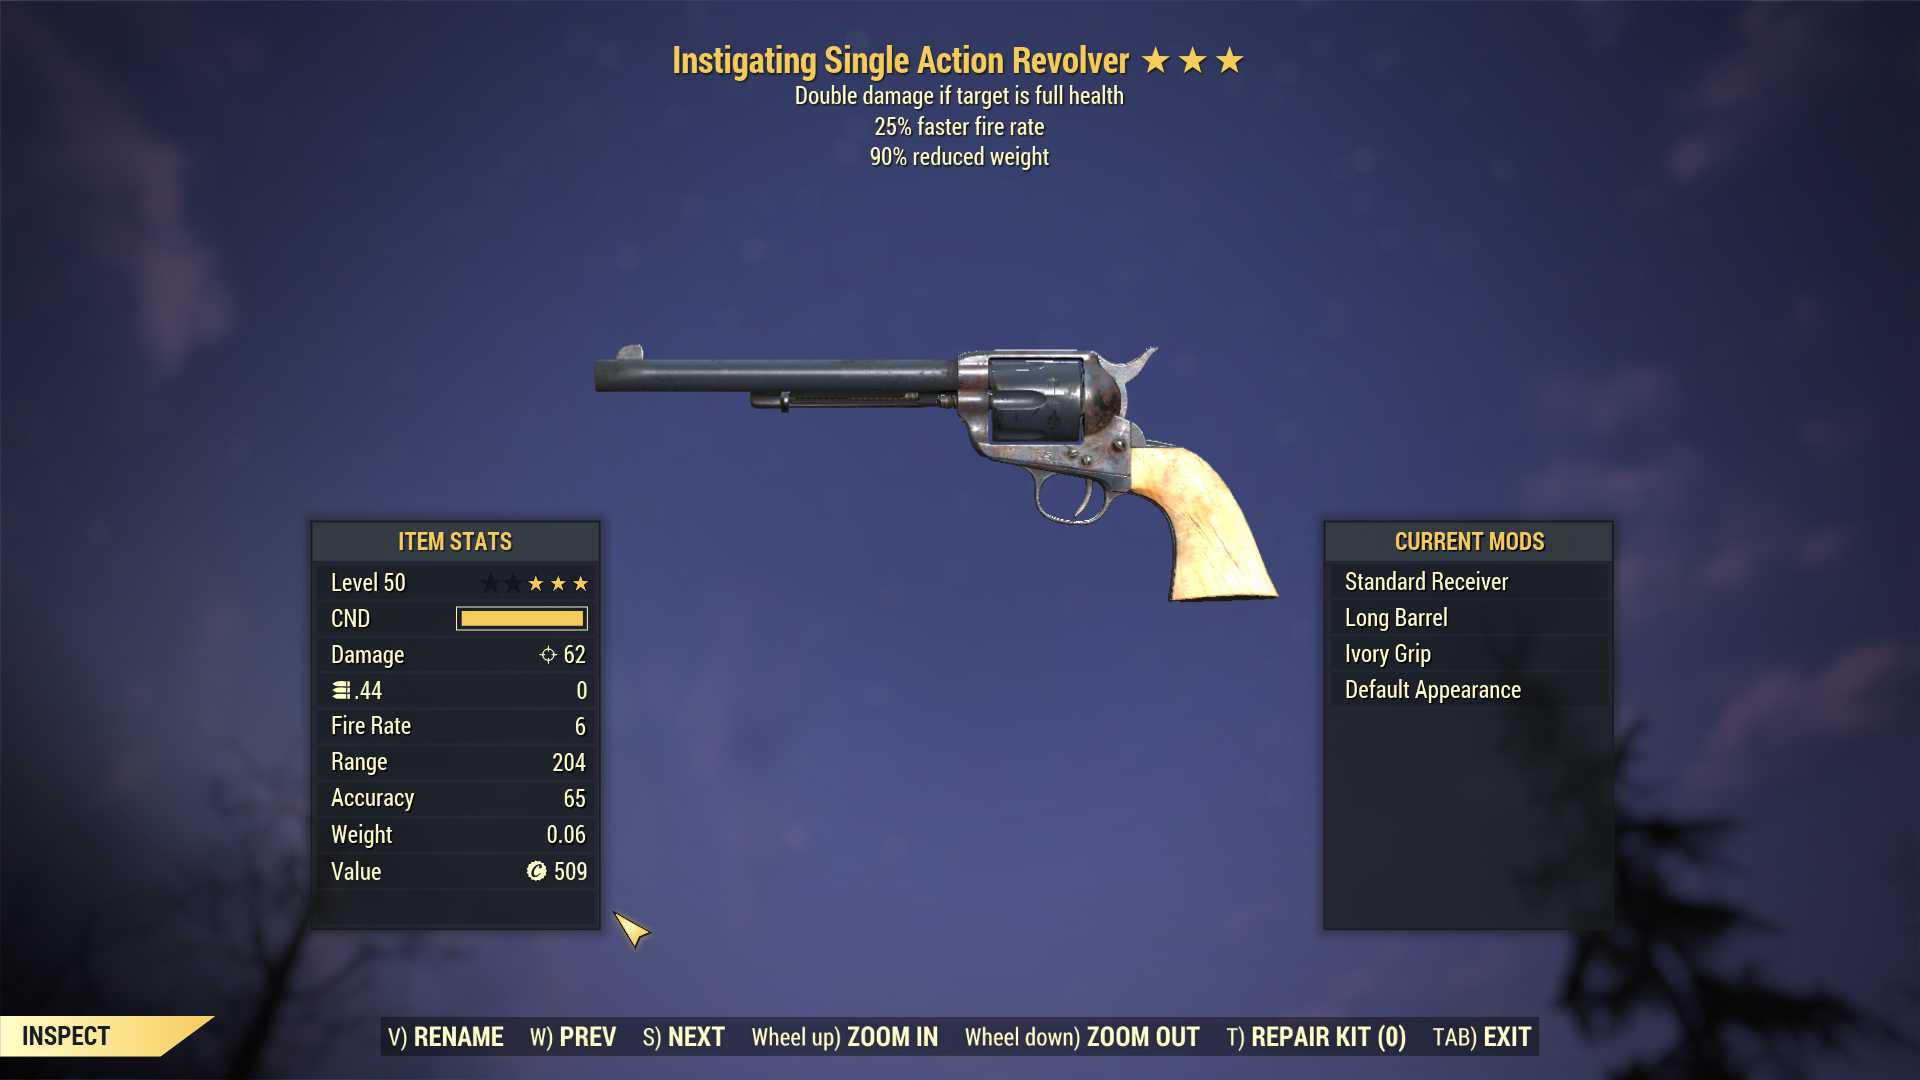 Instigating Single Action Revolver (25% faster fire rate, 90% reduced weight)